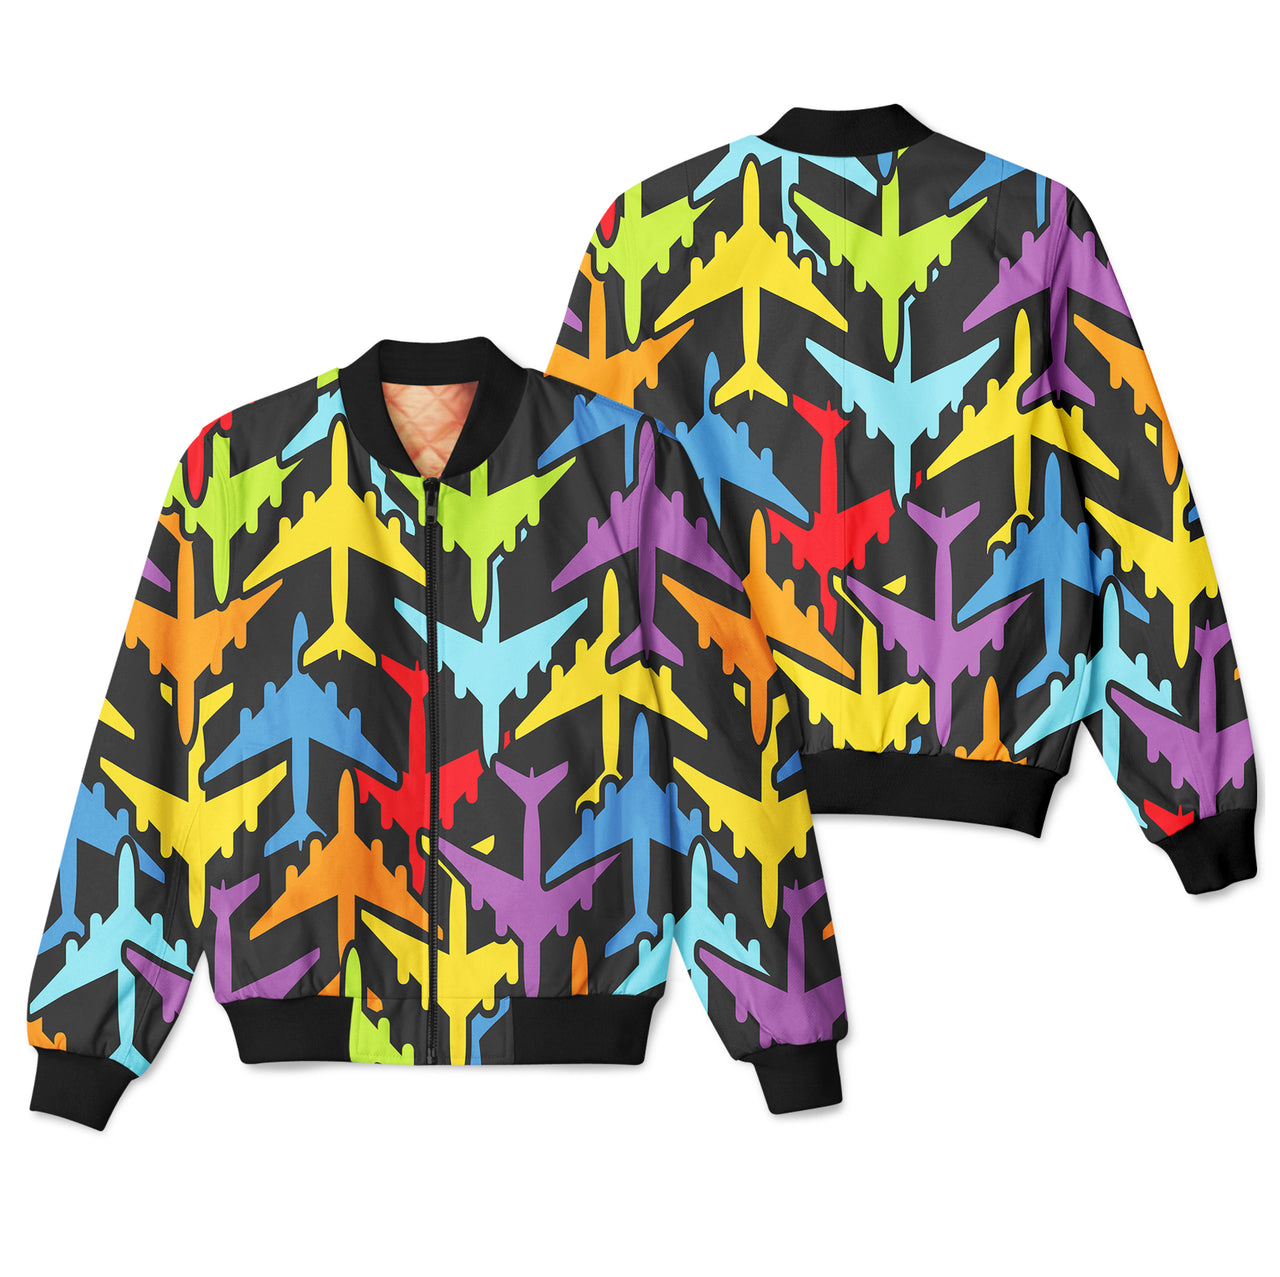 Super Colourful Airplanes Designed 3D Pilot Bomber Jackets